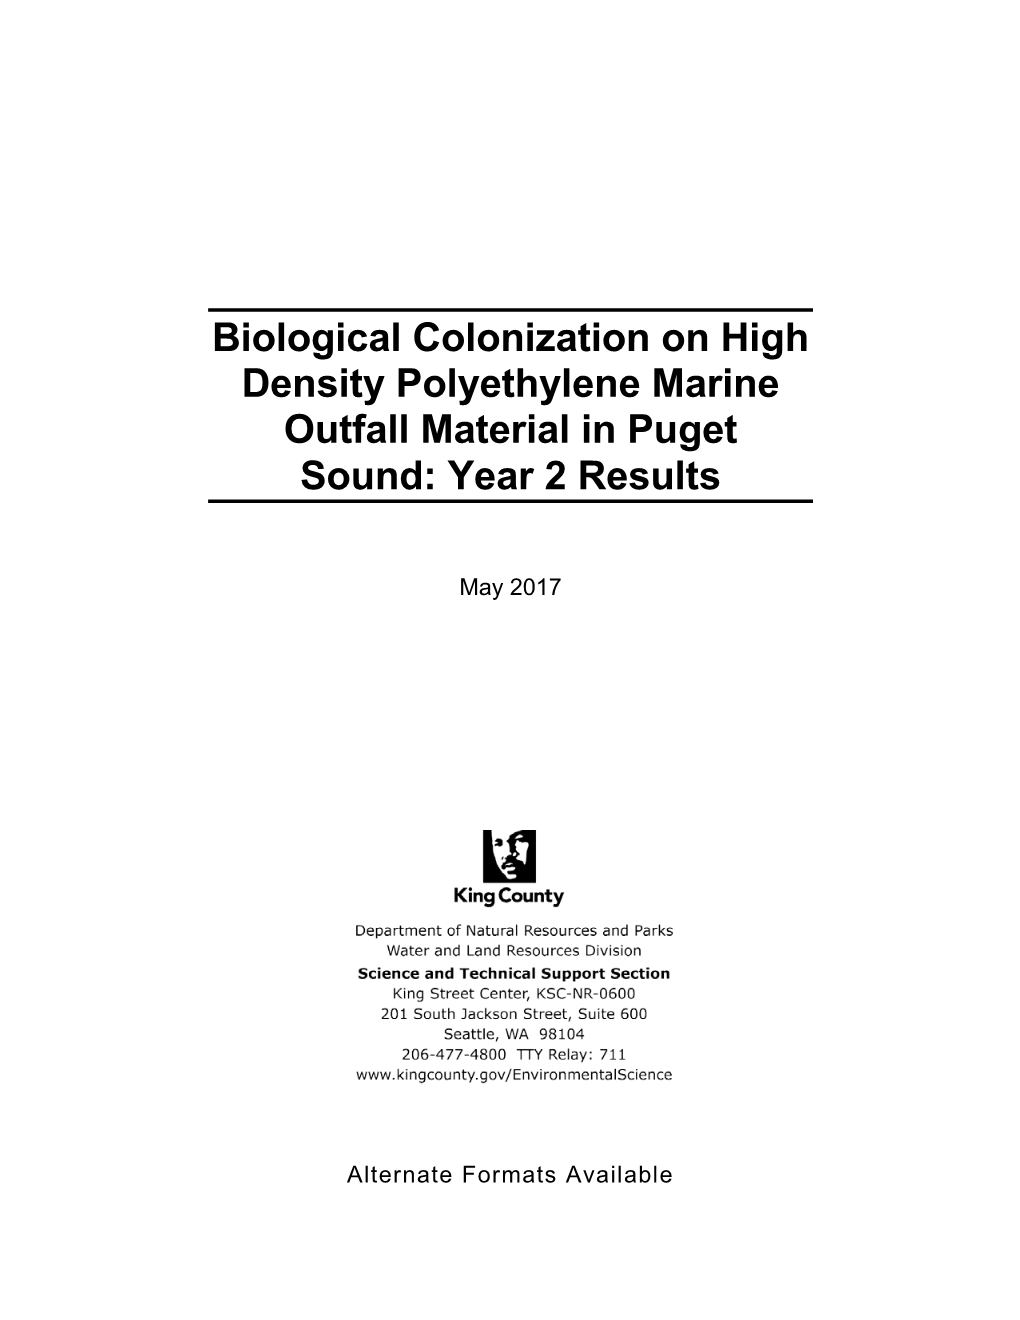 Biological Colonization on High Density Polyethylene Marine Outfall Material in Puget Sound: Year 2 Results